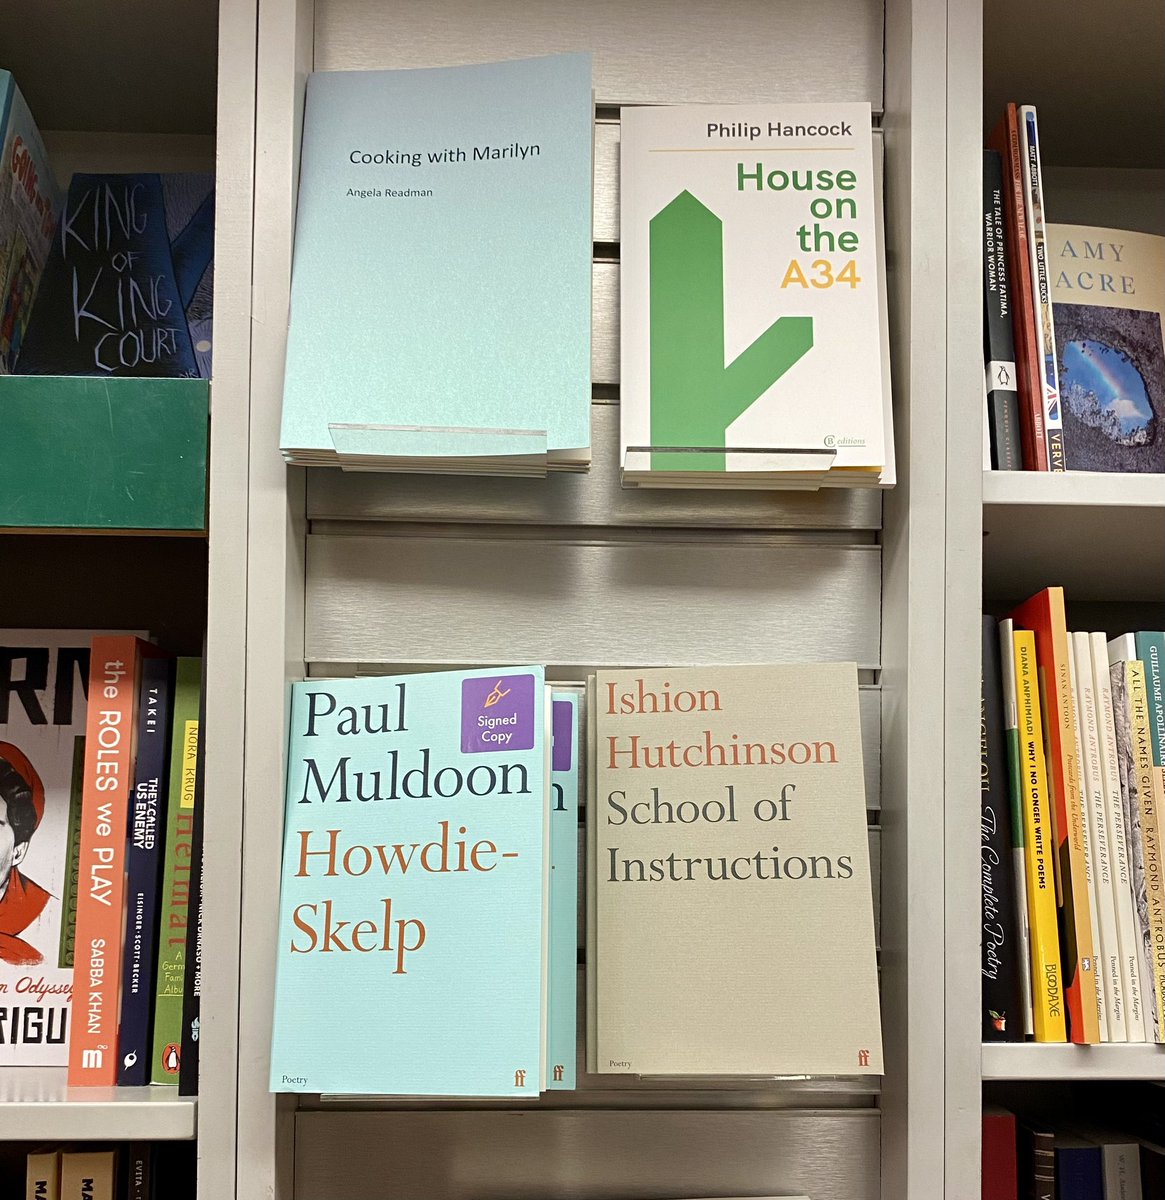 You’ll find our titles sparkling on shelves and whirligigs at London Review Bookshop, 14 Bury Place, or email blueprintpress@gmail.com